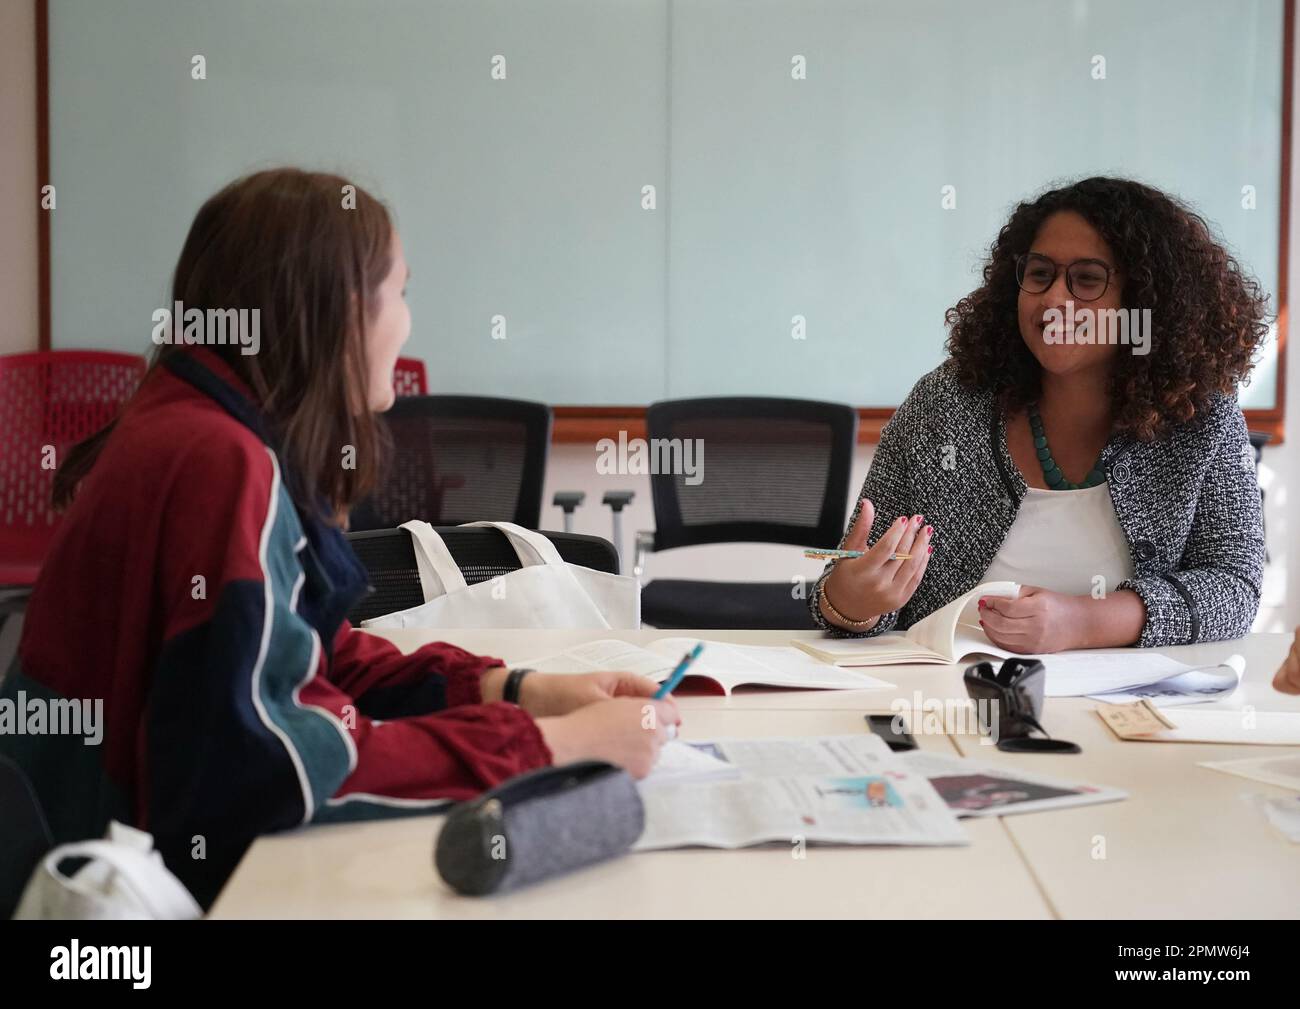 (230415) -- BEIJING, April 15, 2023 (Xinhua) -- Rafaela (R) and Maria talk at a classroom at the Yenching Academy of Peking University in Beijing, capital of China, March 31, 2023. Maria Eduarda Variani, Rafaela Viana dos Santos, Manuela Boiteux Pestana, and Marco Andre Rocha Germano are Brazilian students studying in the Master of China Studies program at the Yenching Academy of Peking University in China. The four of them have been interested in Chinese culture since they were young. After arriving in Beijing, they have been impressed by the Chinese capital's profound cultural heritage, Stock Photo